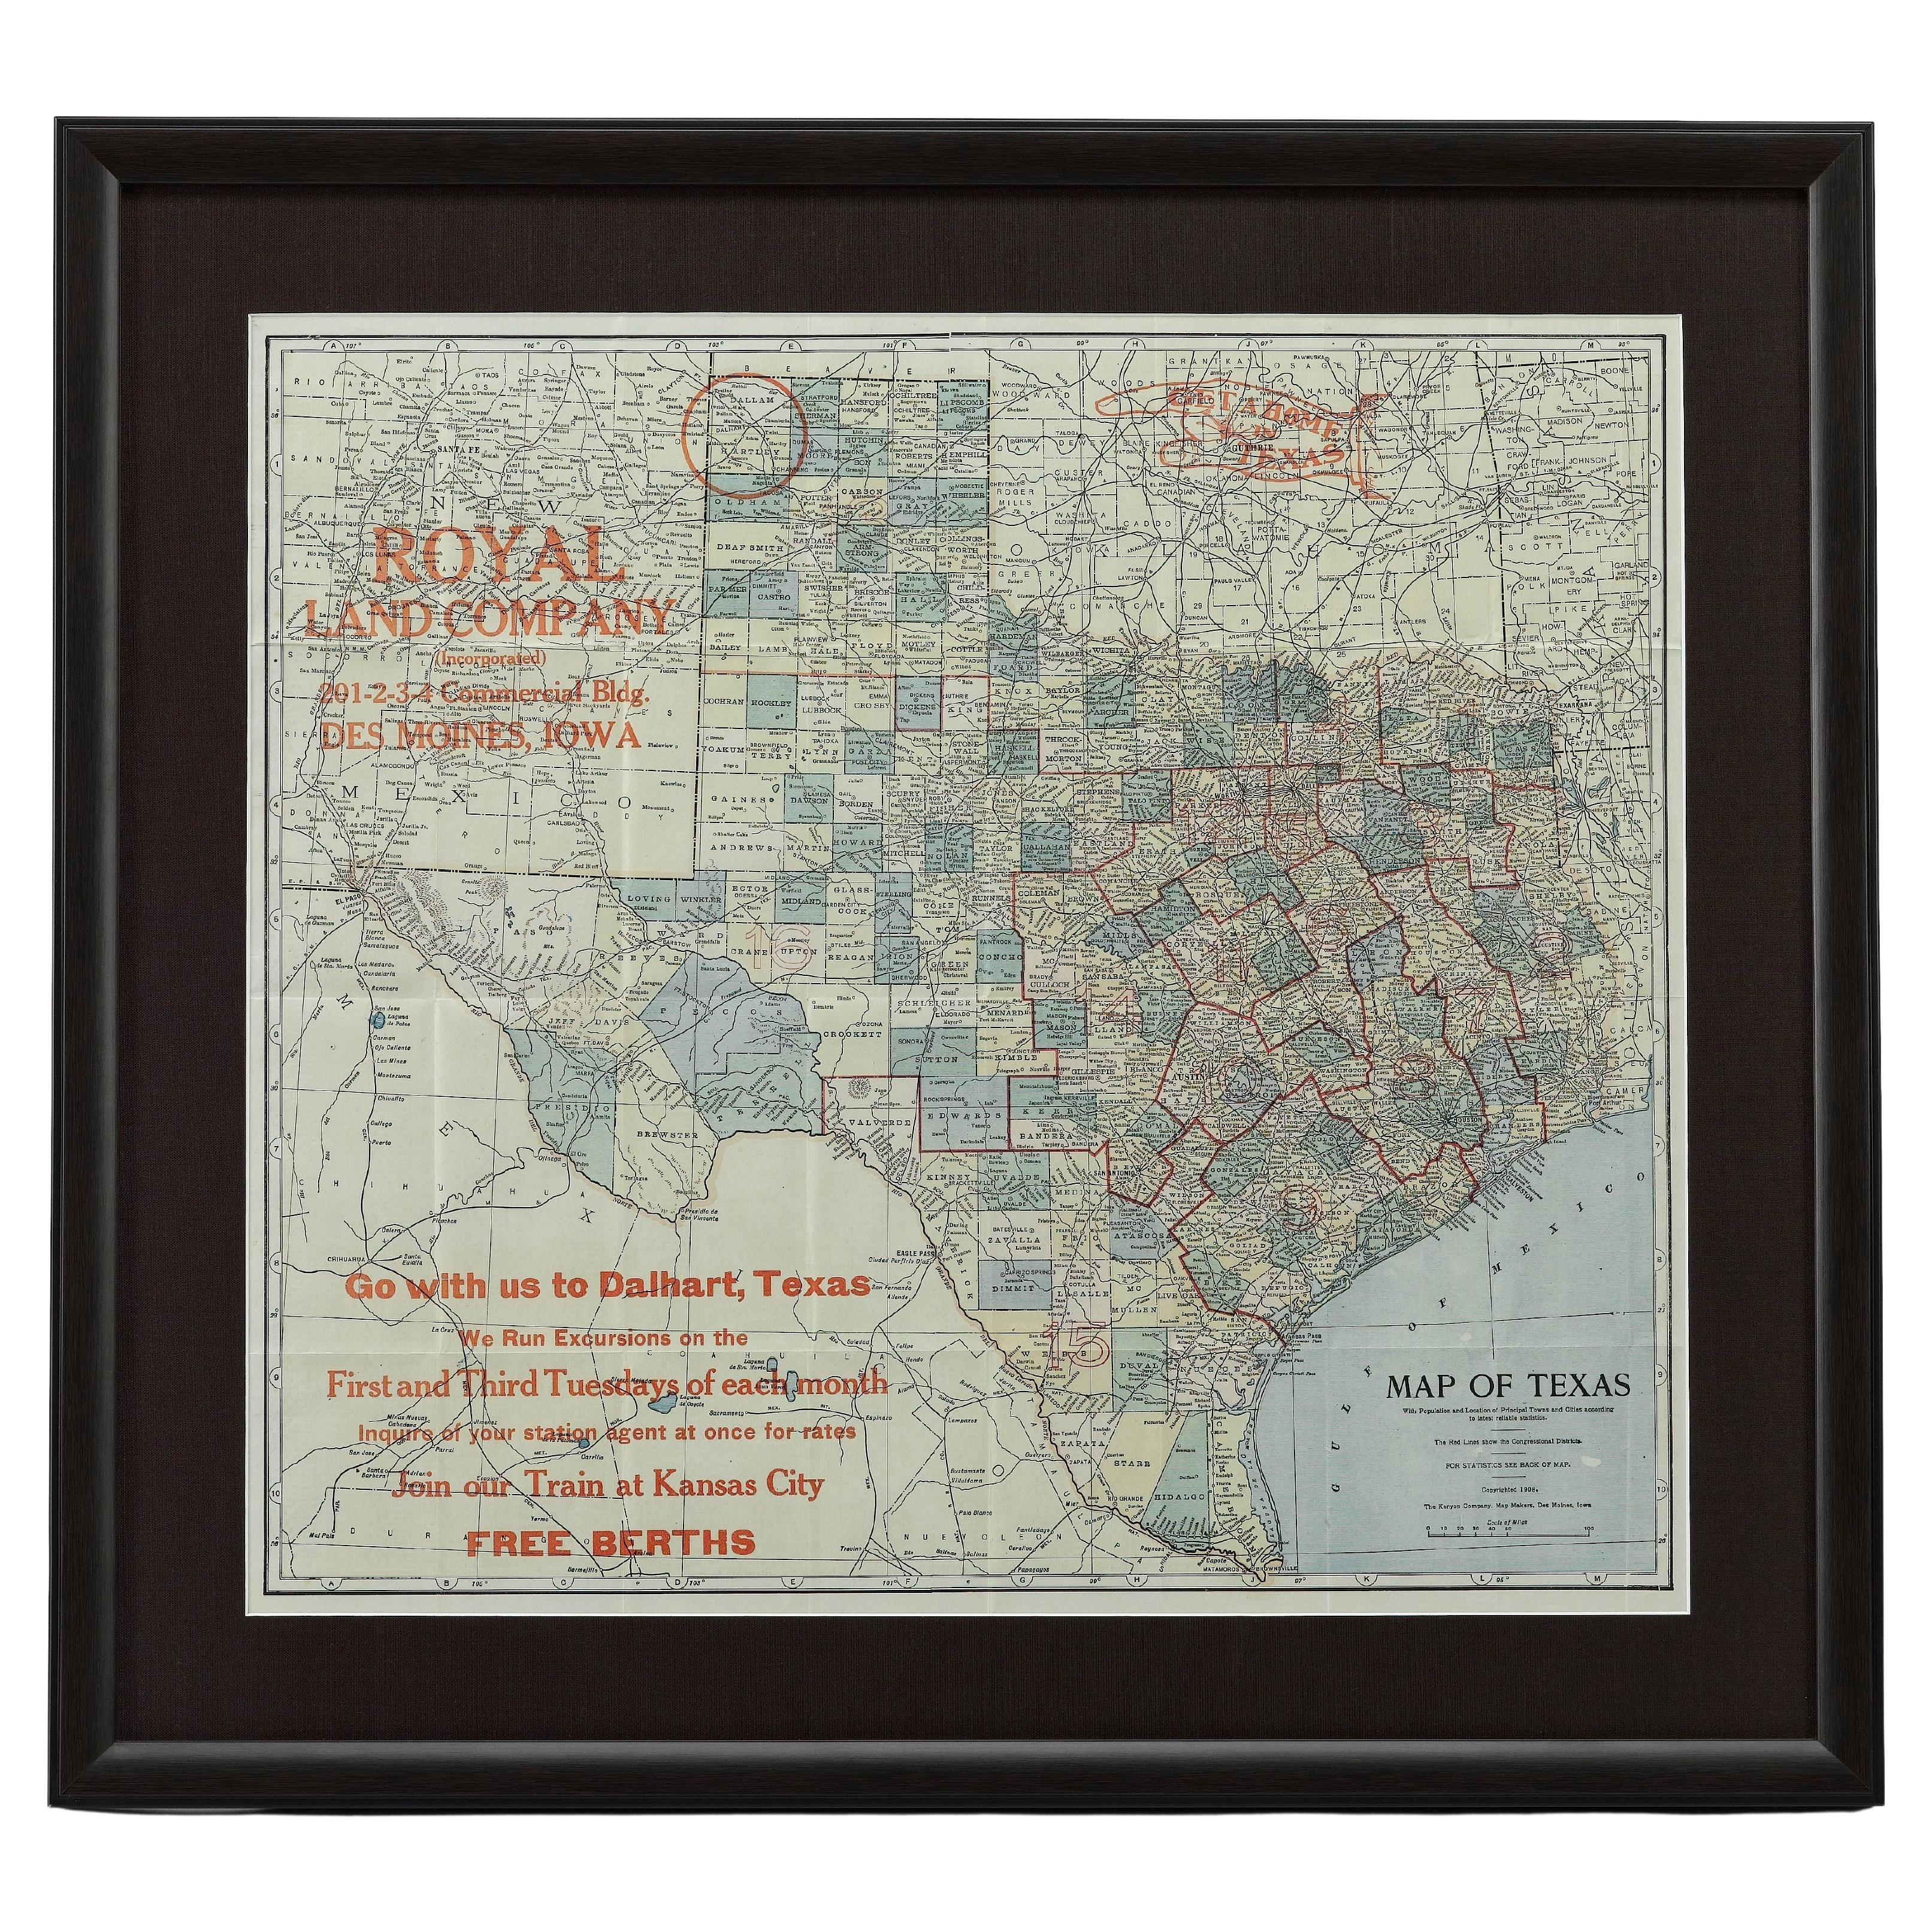 1908 "Map of Texas" by The Kenyon Company